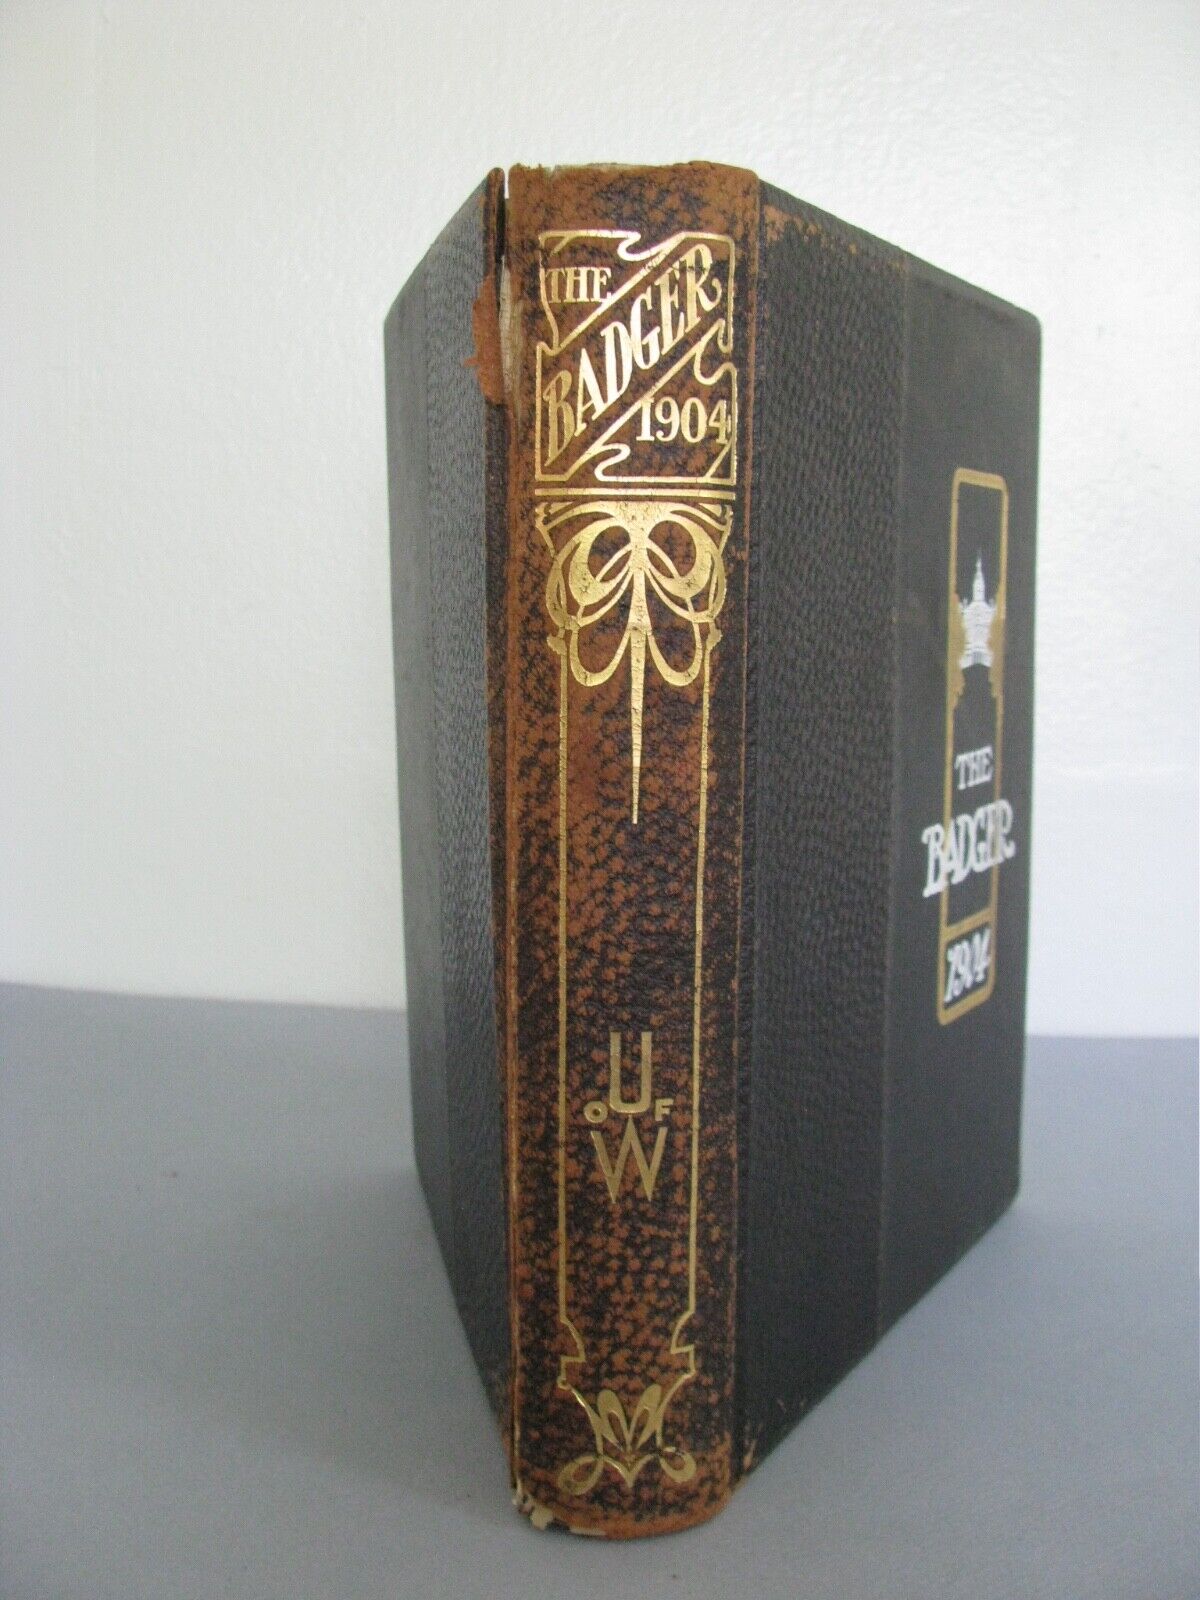 THE BADGER 1904 YEARBOOK UNIVERSITY OF WISCONSIN MADISON - ILLUSTRATED +PROGRAM